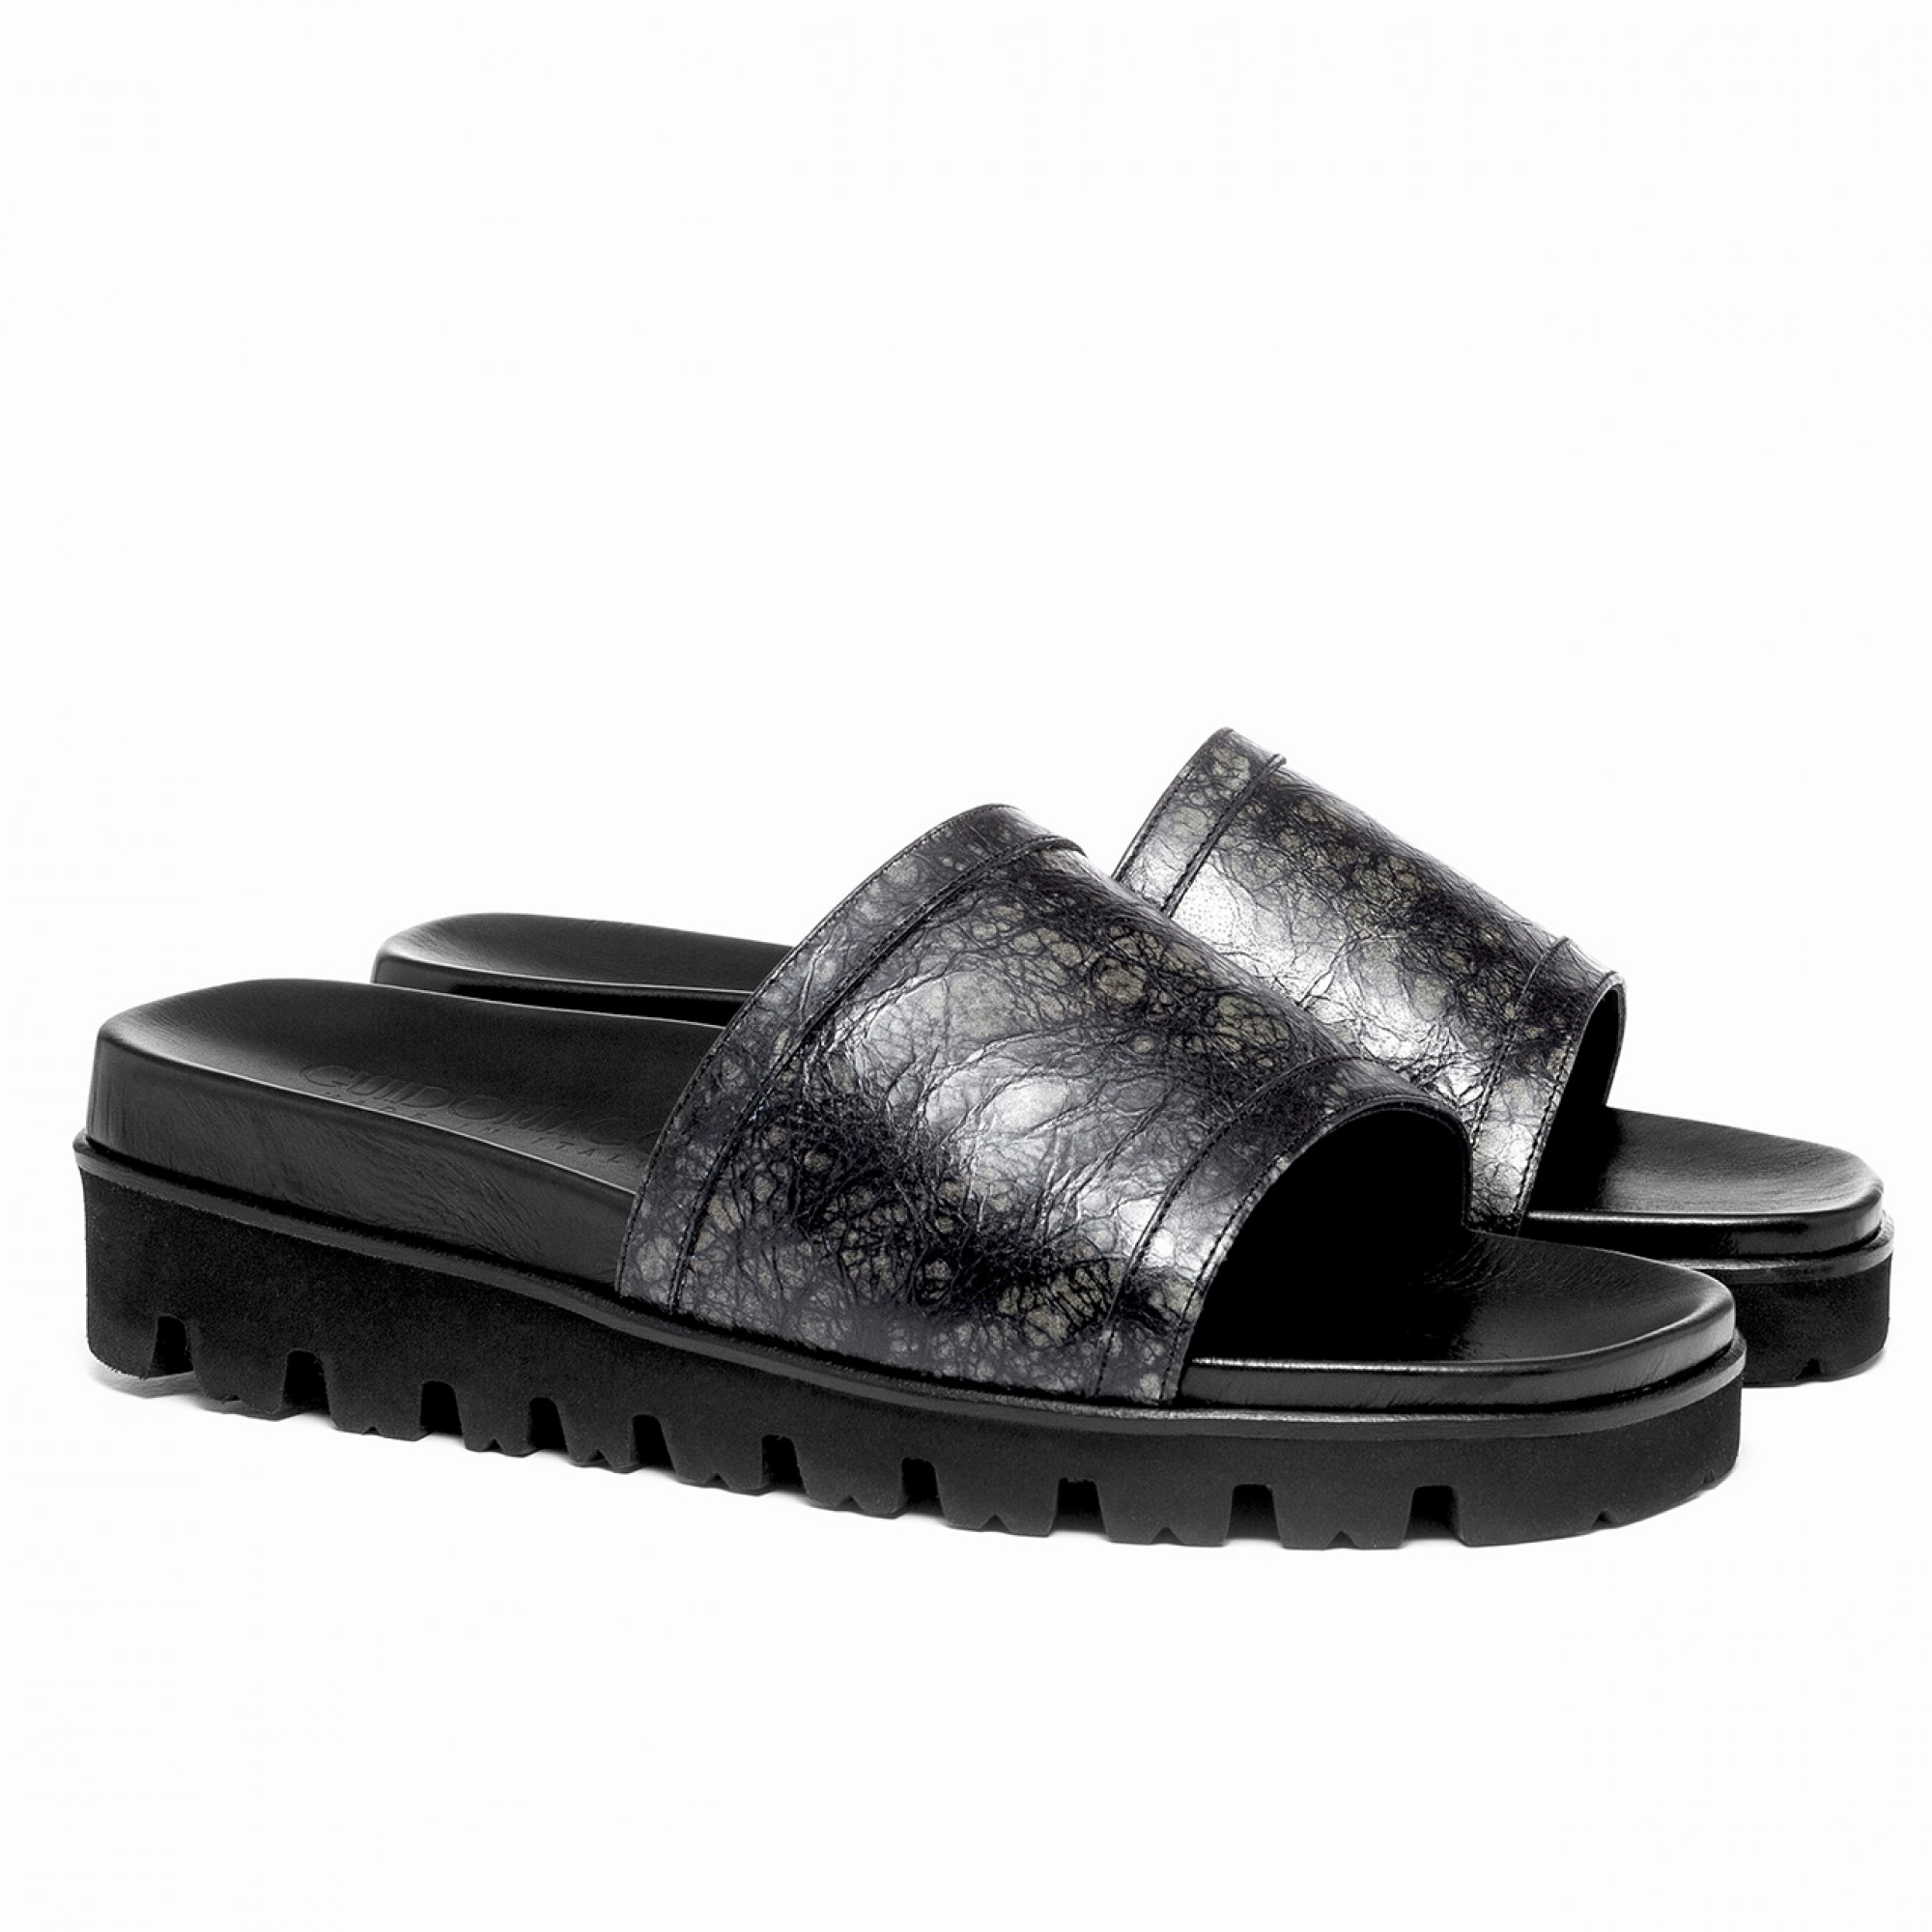 Forte dei Marmi - Elevator Sandals in Full grain Leather up to 2 inches